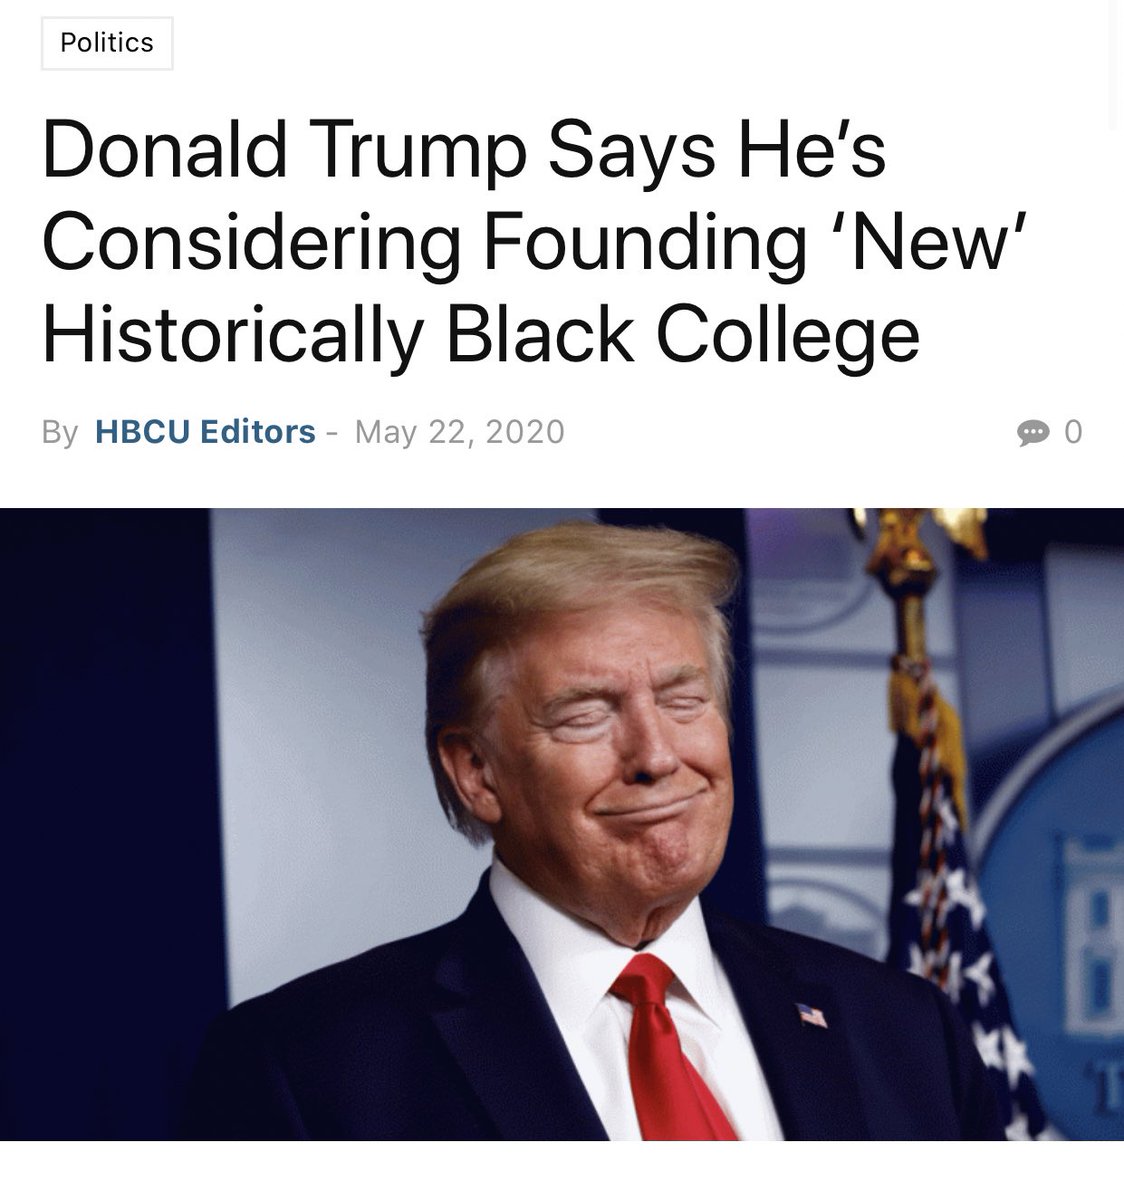 Please don’t be an idiot. This is just a campaign tactic. You can’t have a “new” HBCU. HBCUs are defined by the US Department of Education as institutions founded BEFORE the civil rights act of 1964. It is IMPOSSIBLE to create a new one.